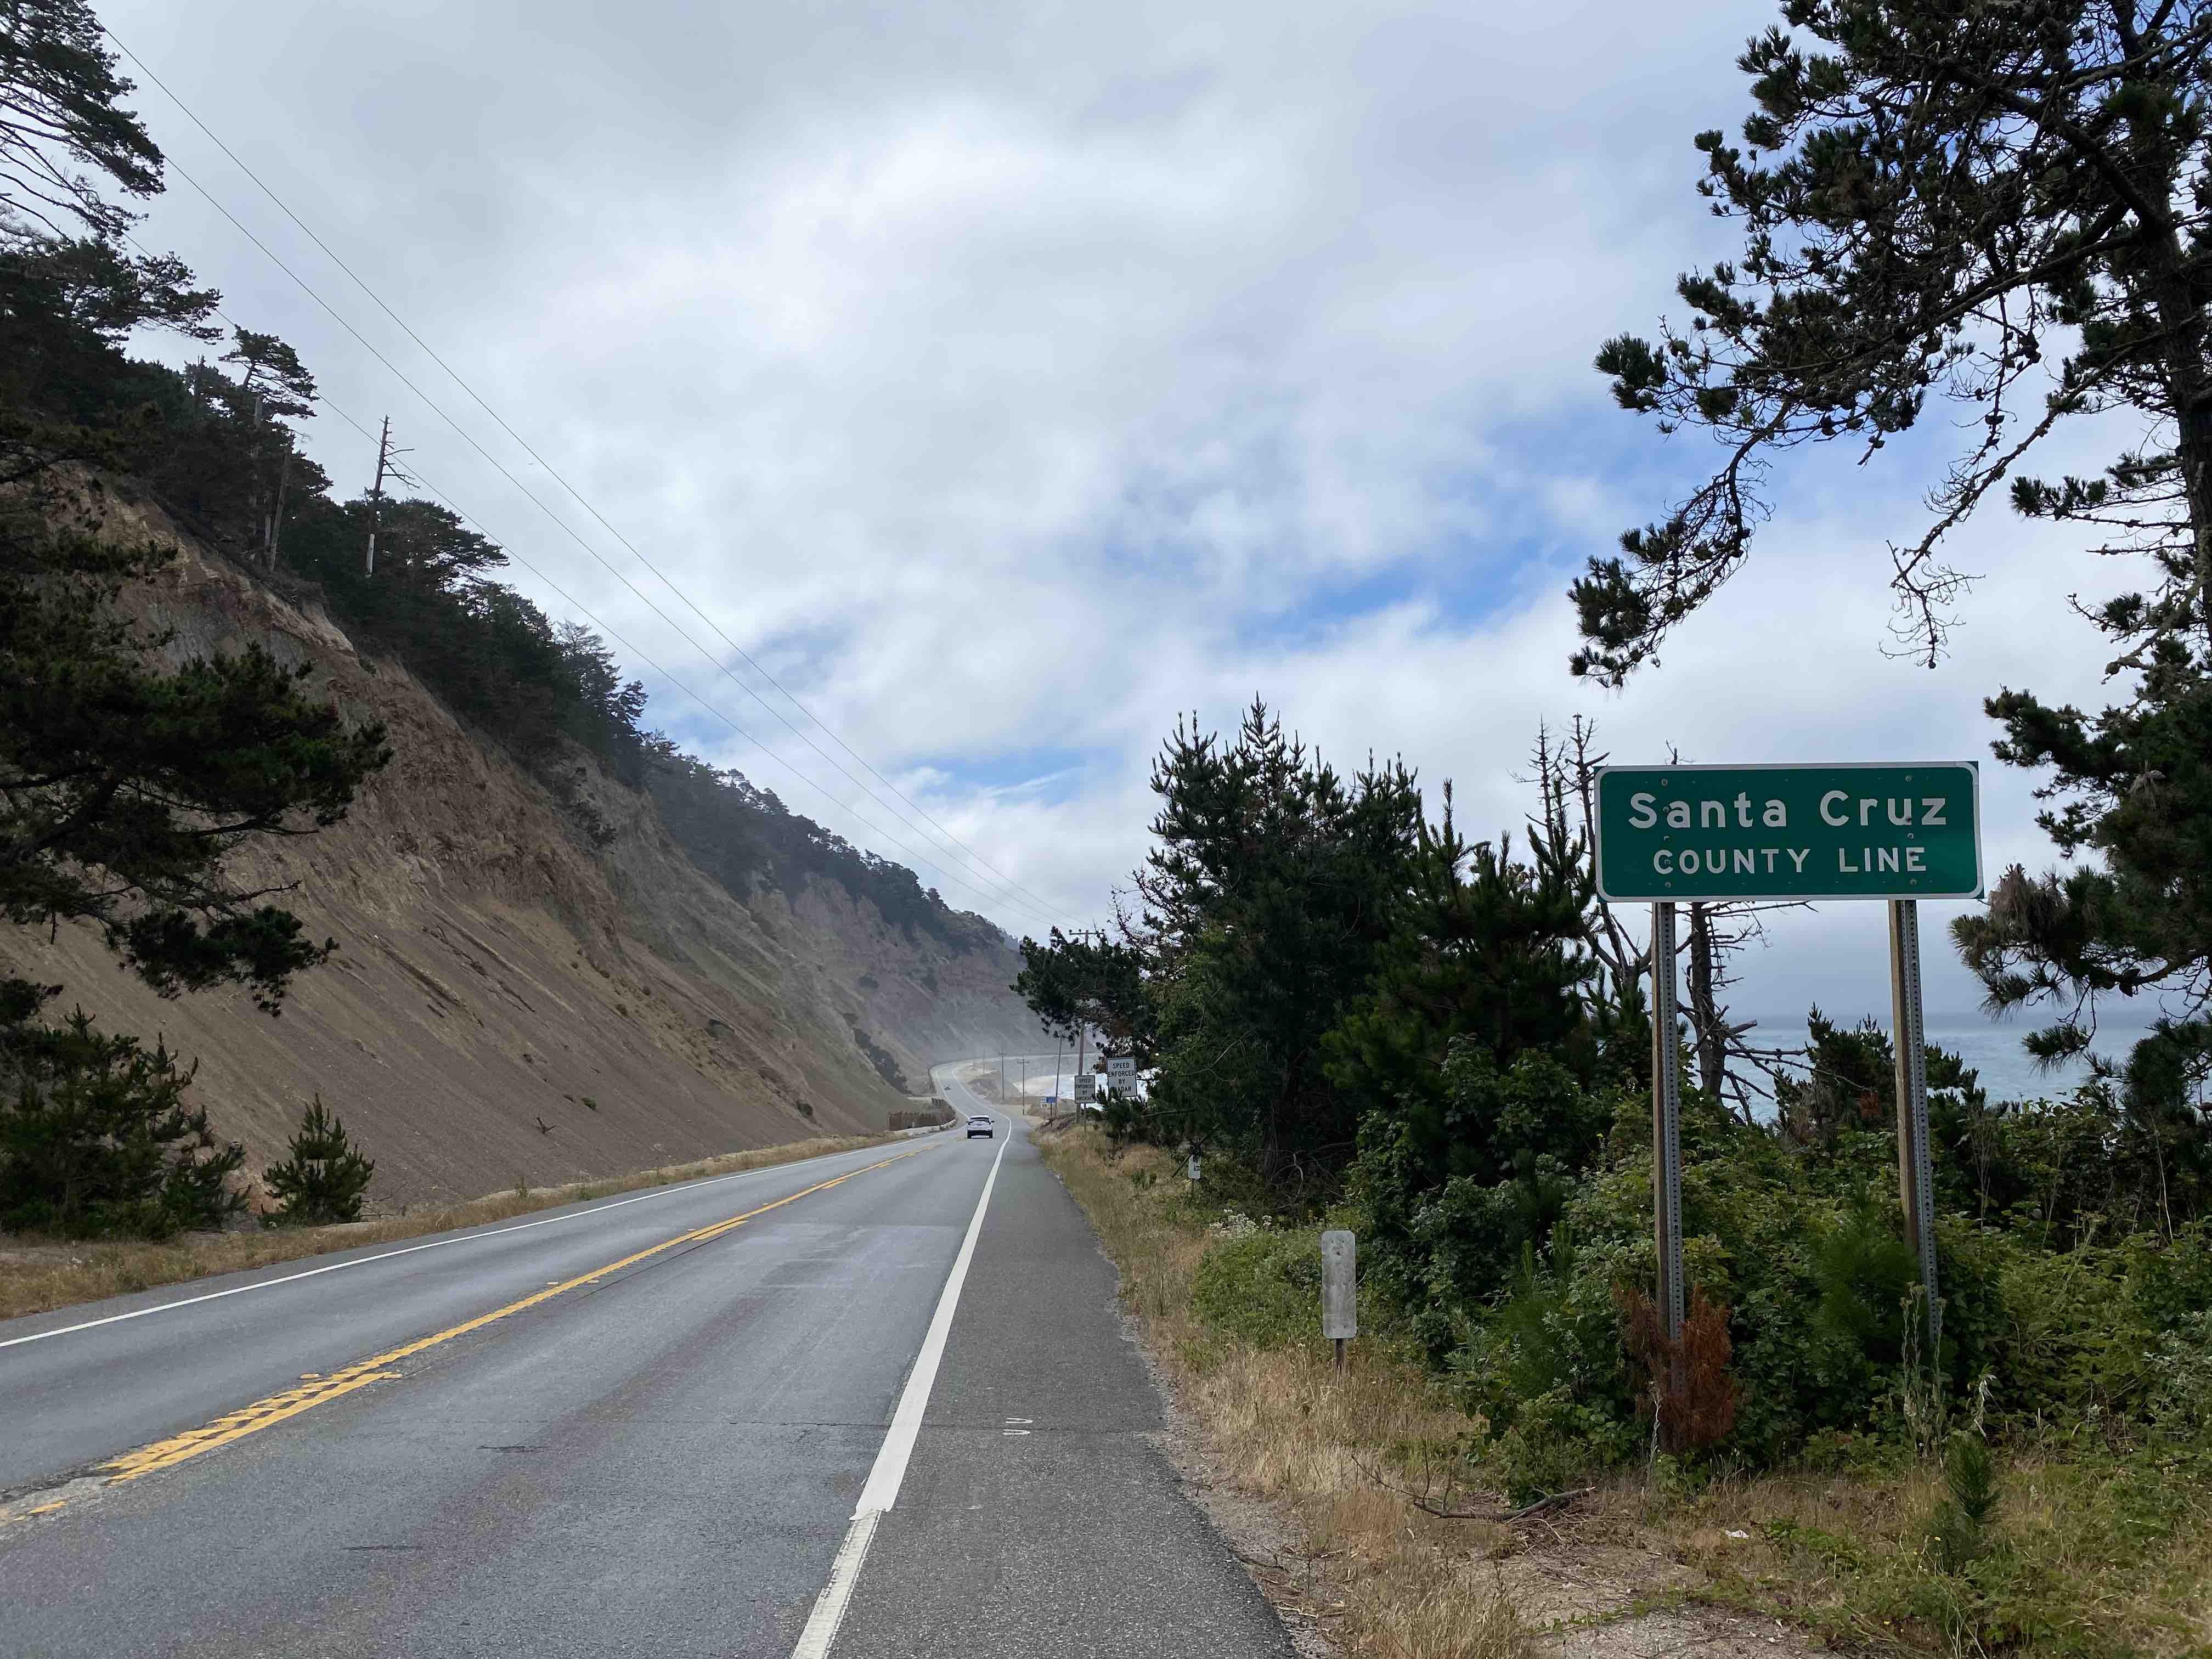 Santa Cruz county line road sign along road in front of mountains sloping into the ocean